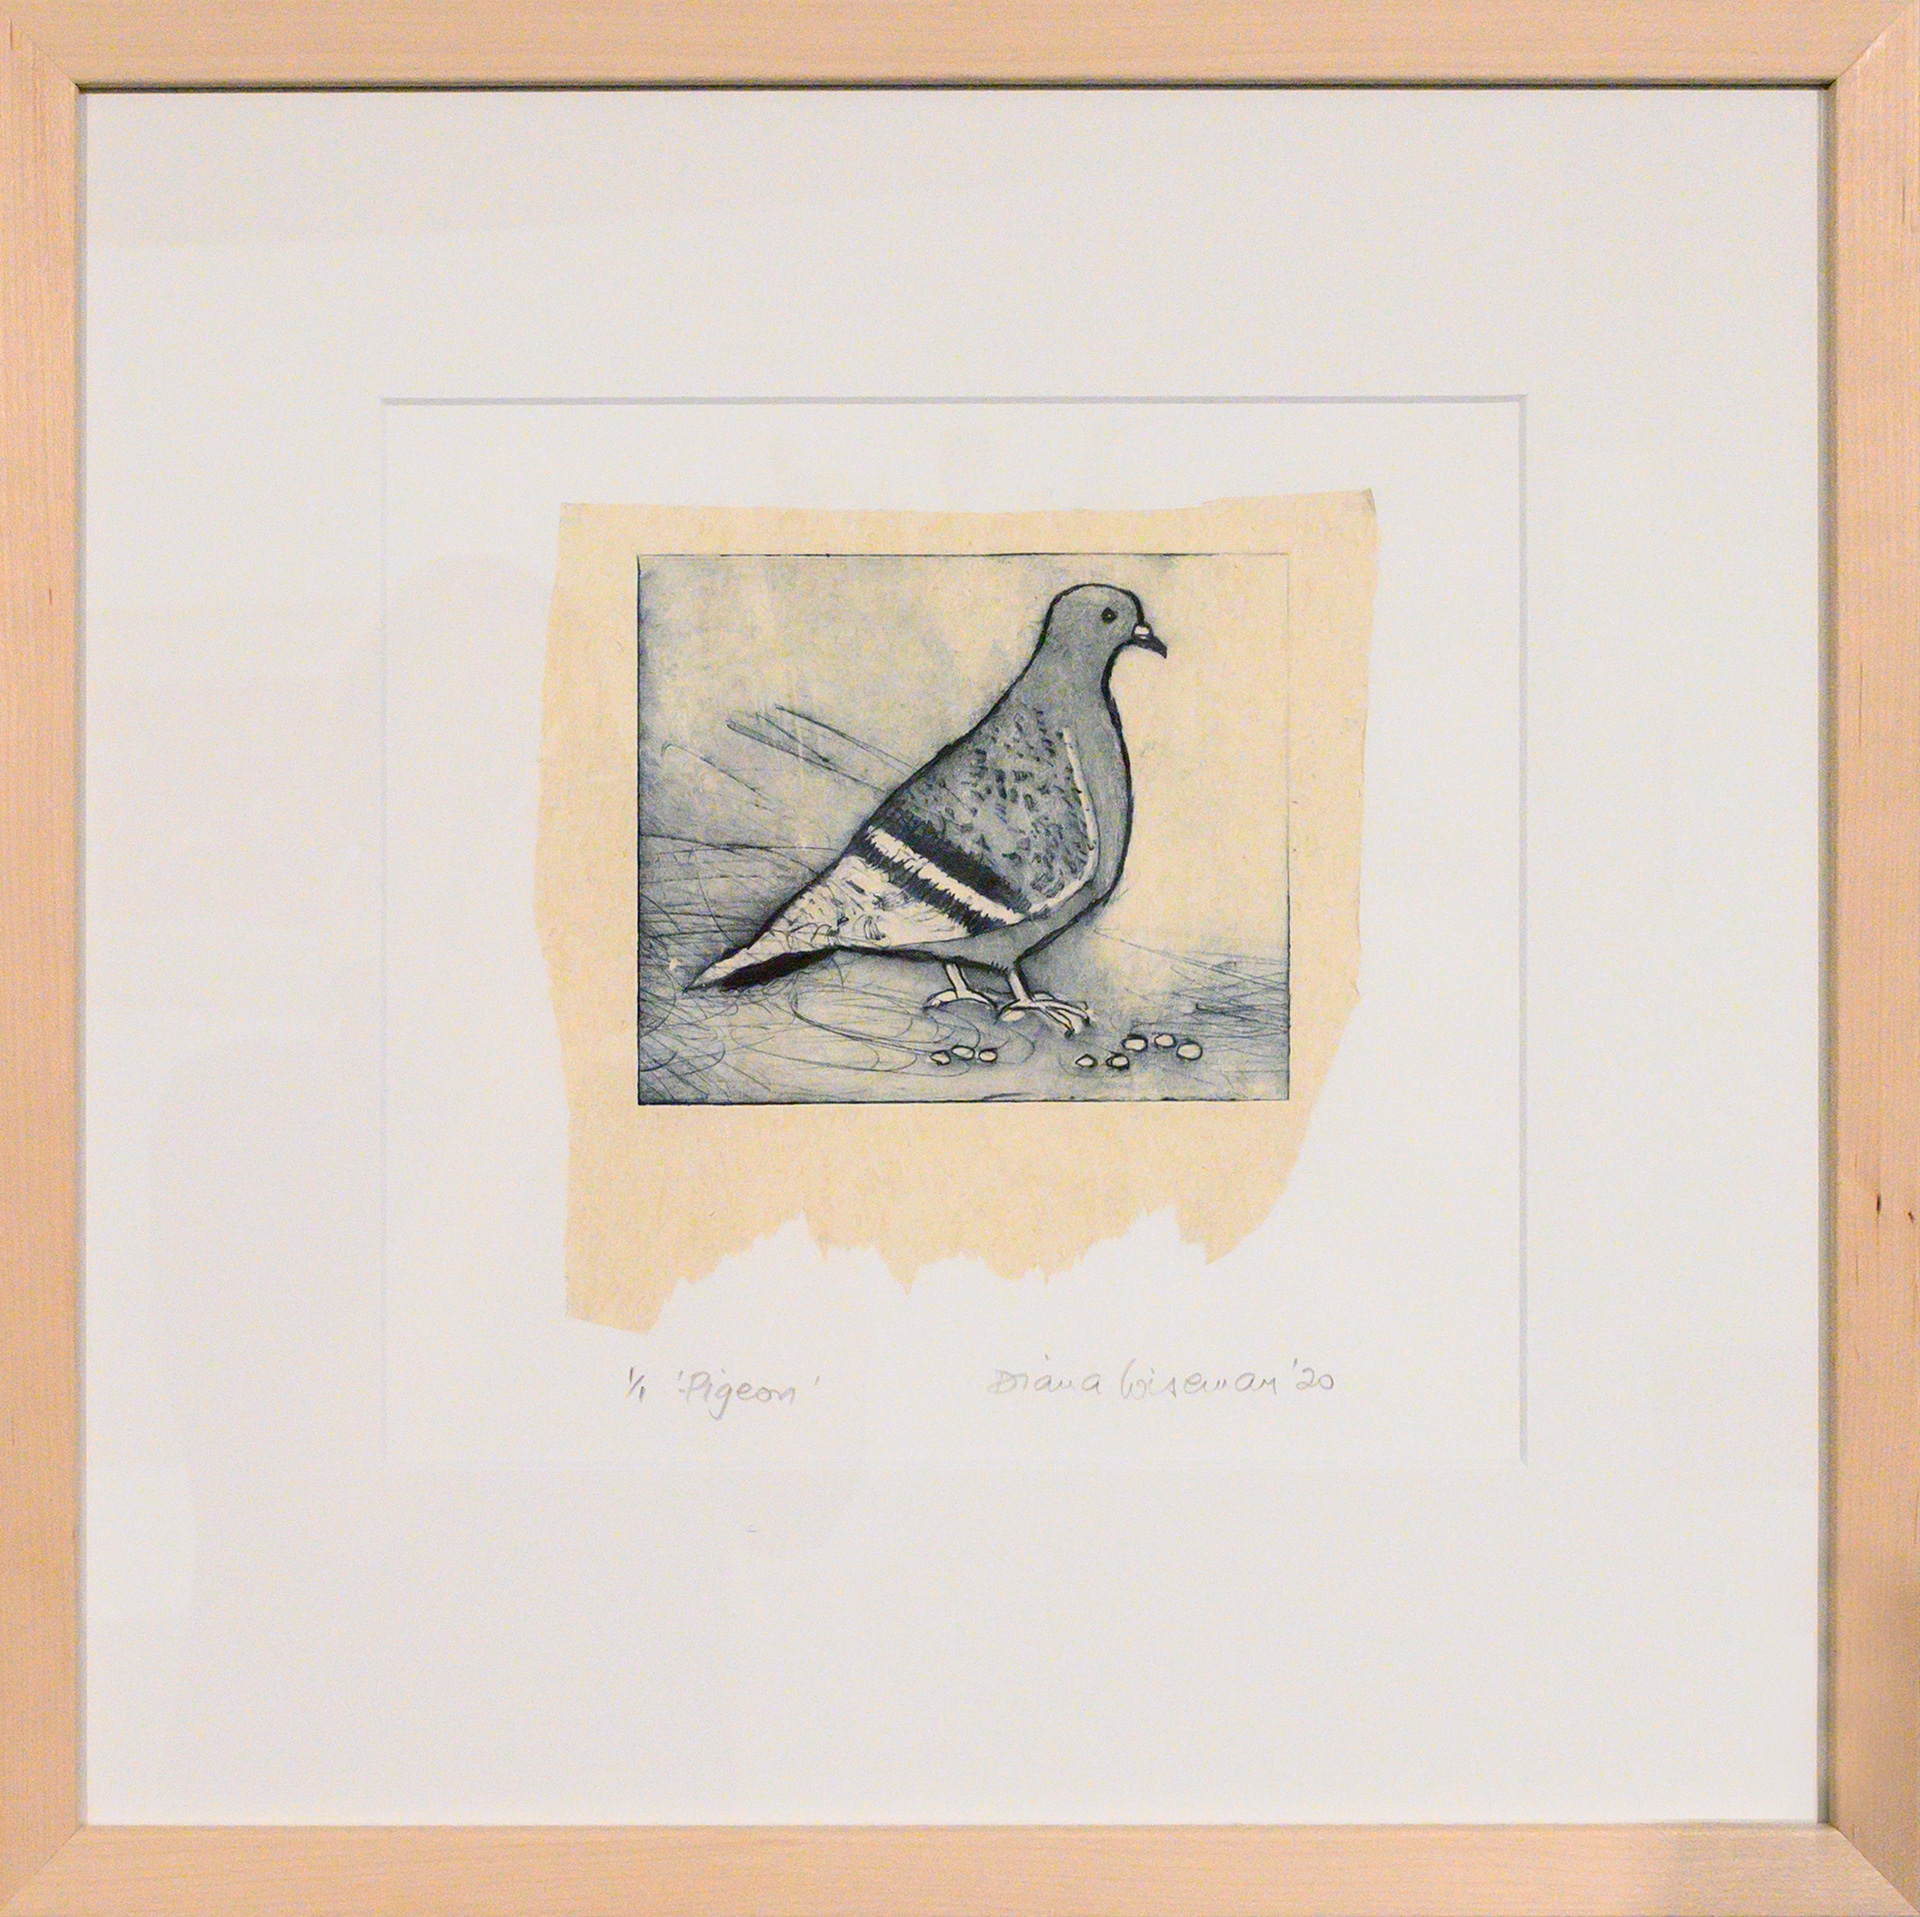 Framed artwork by Diana Wiseman of a pigeon